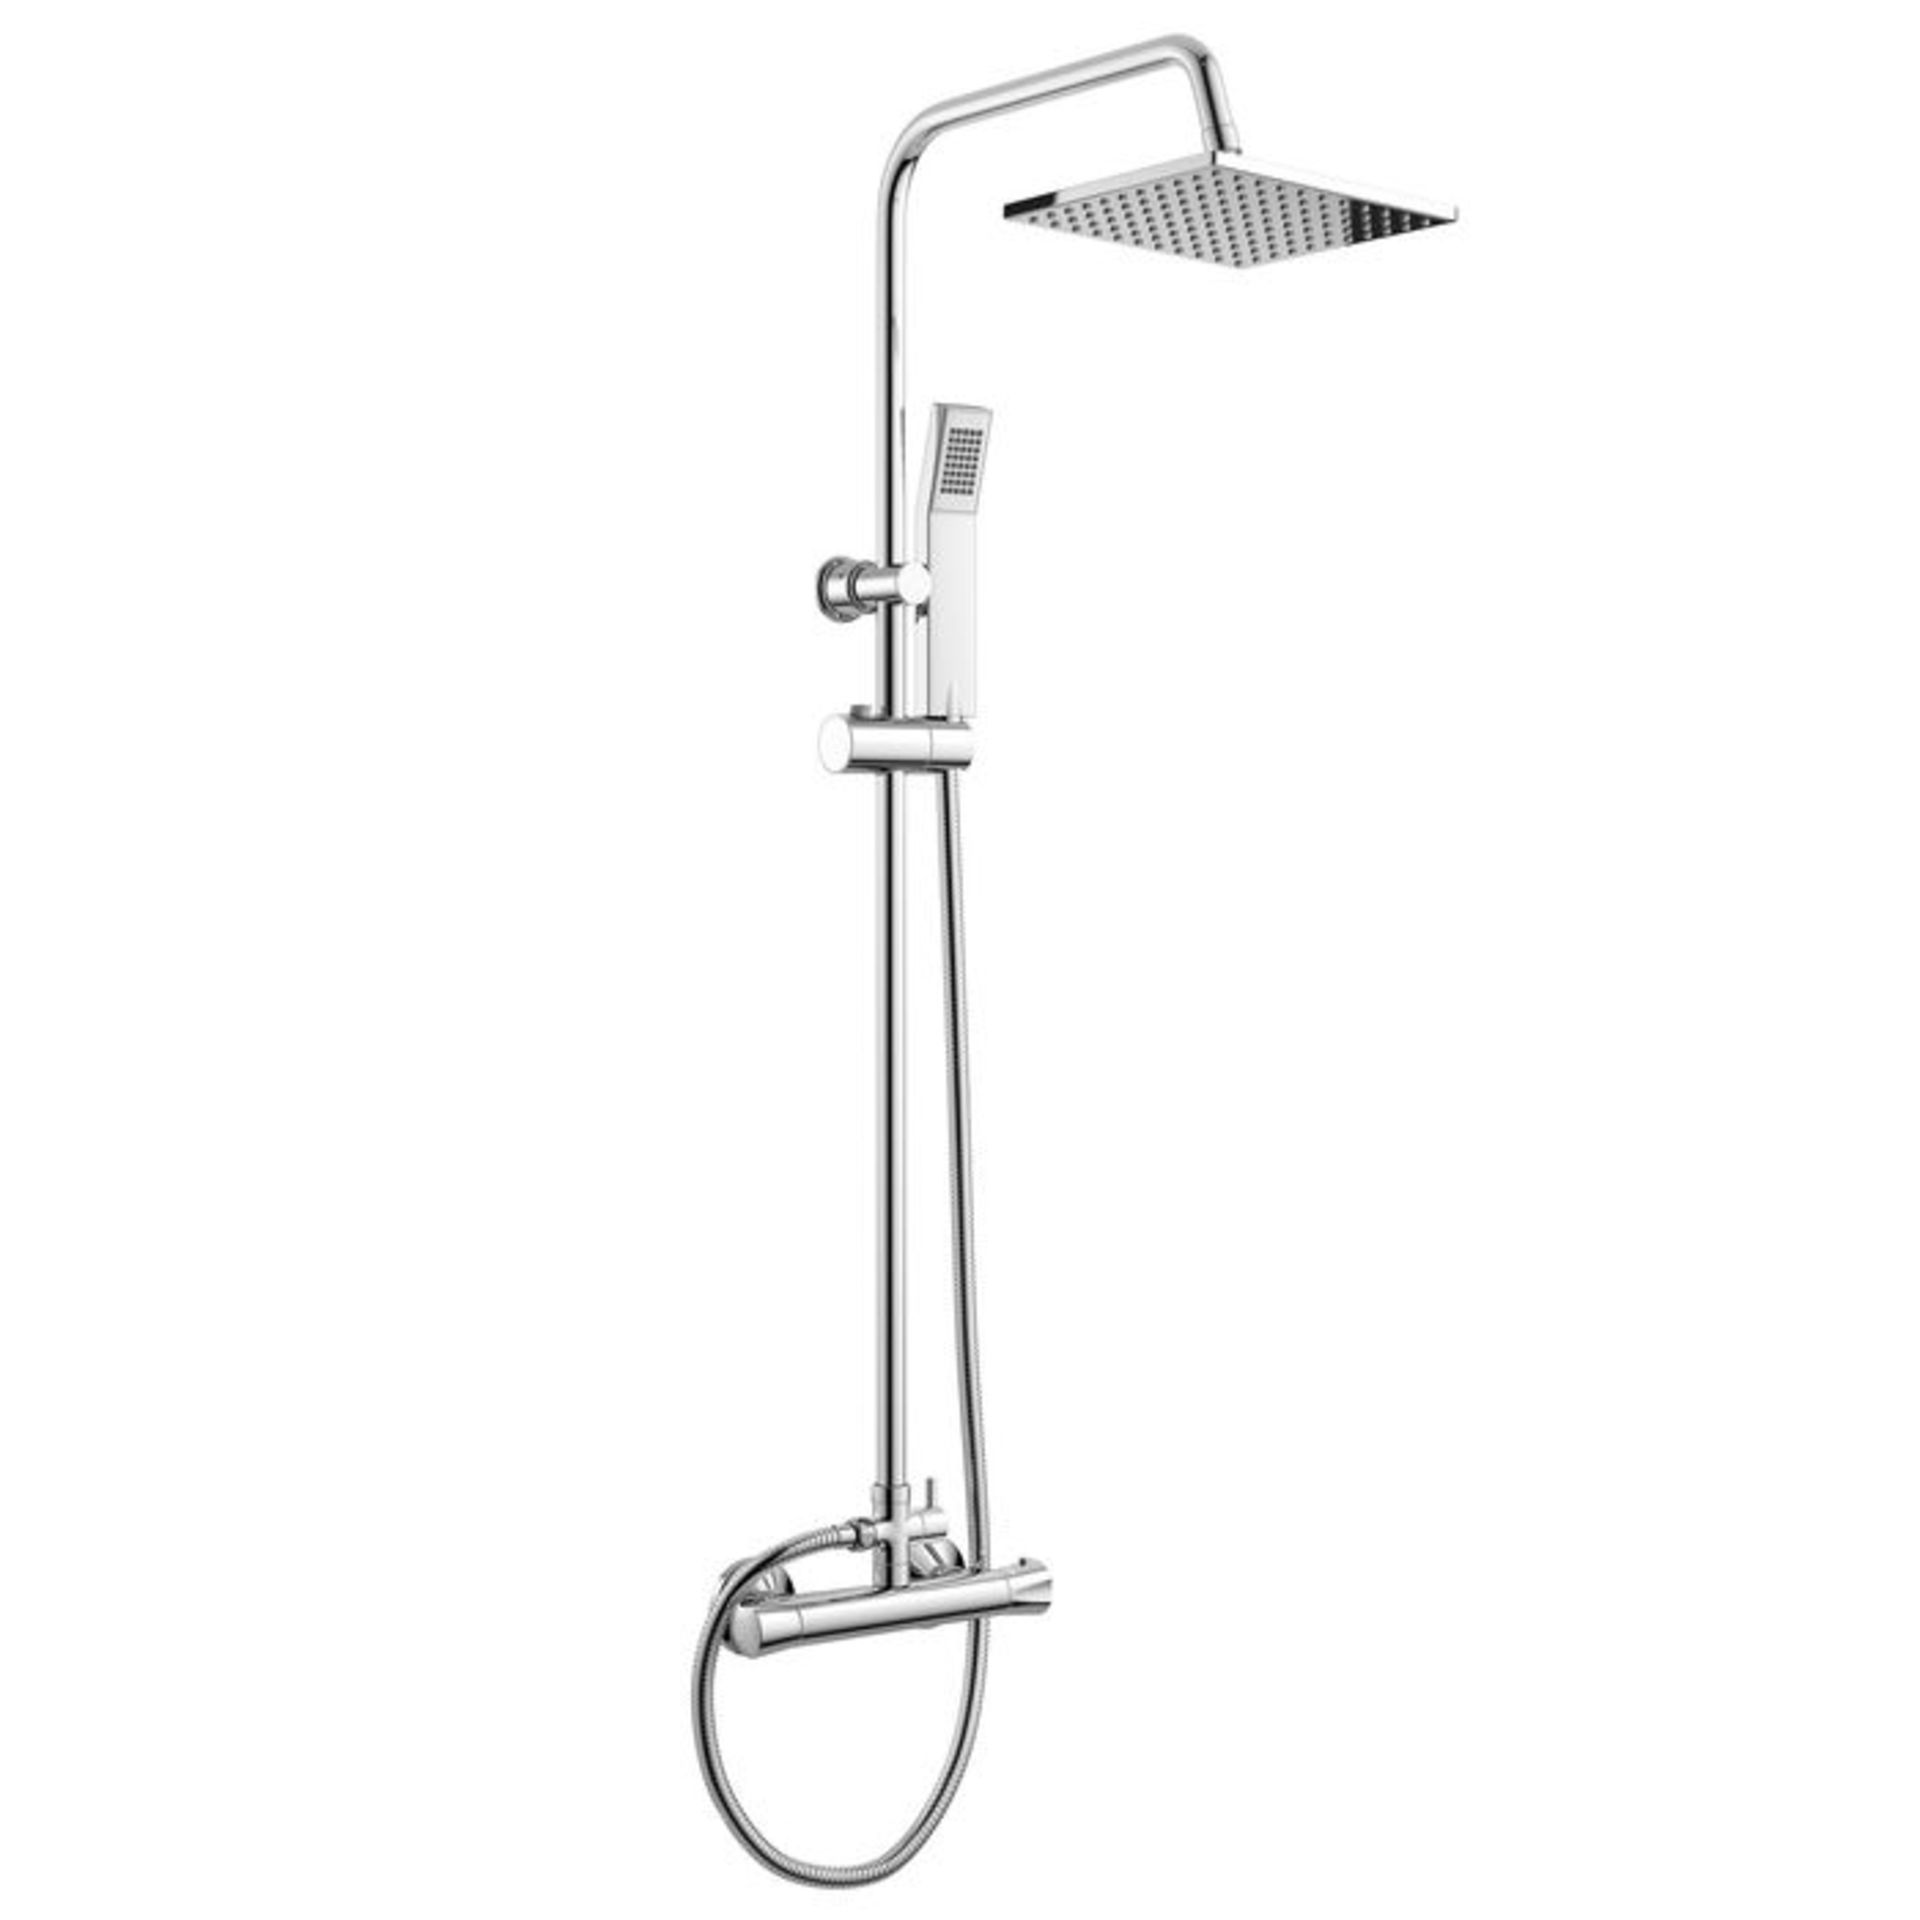 (AH34) Square Exposed Thermostatic Shower Kit & Medium Head. Curved features and contemporary - Image 2 of 3